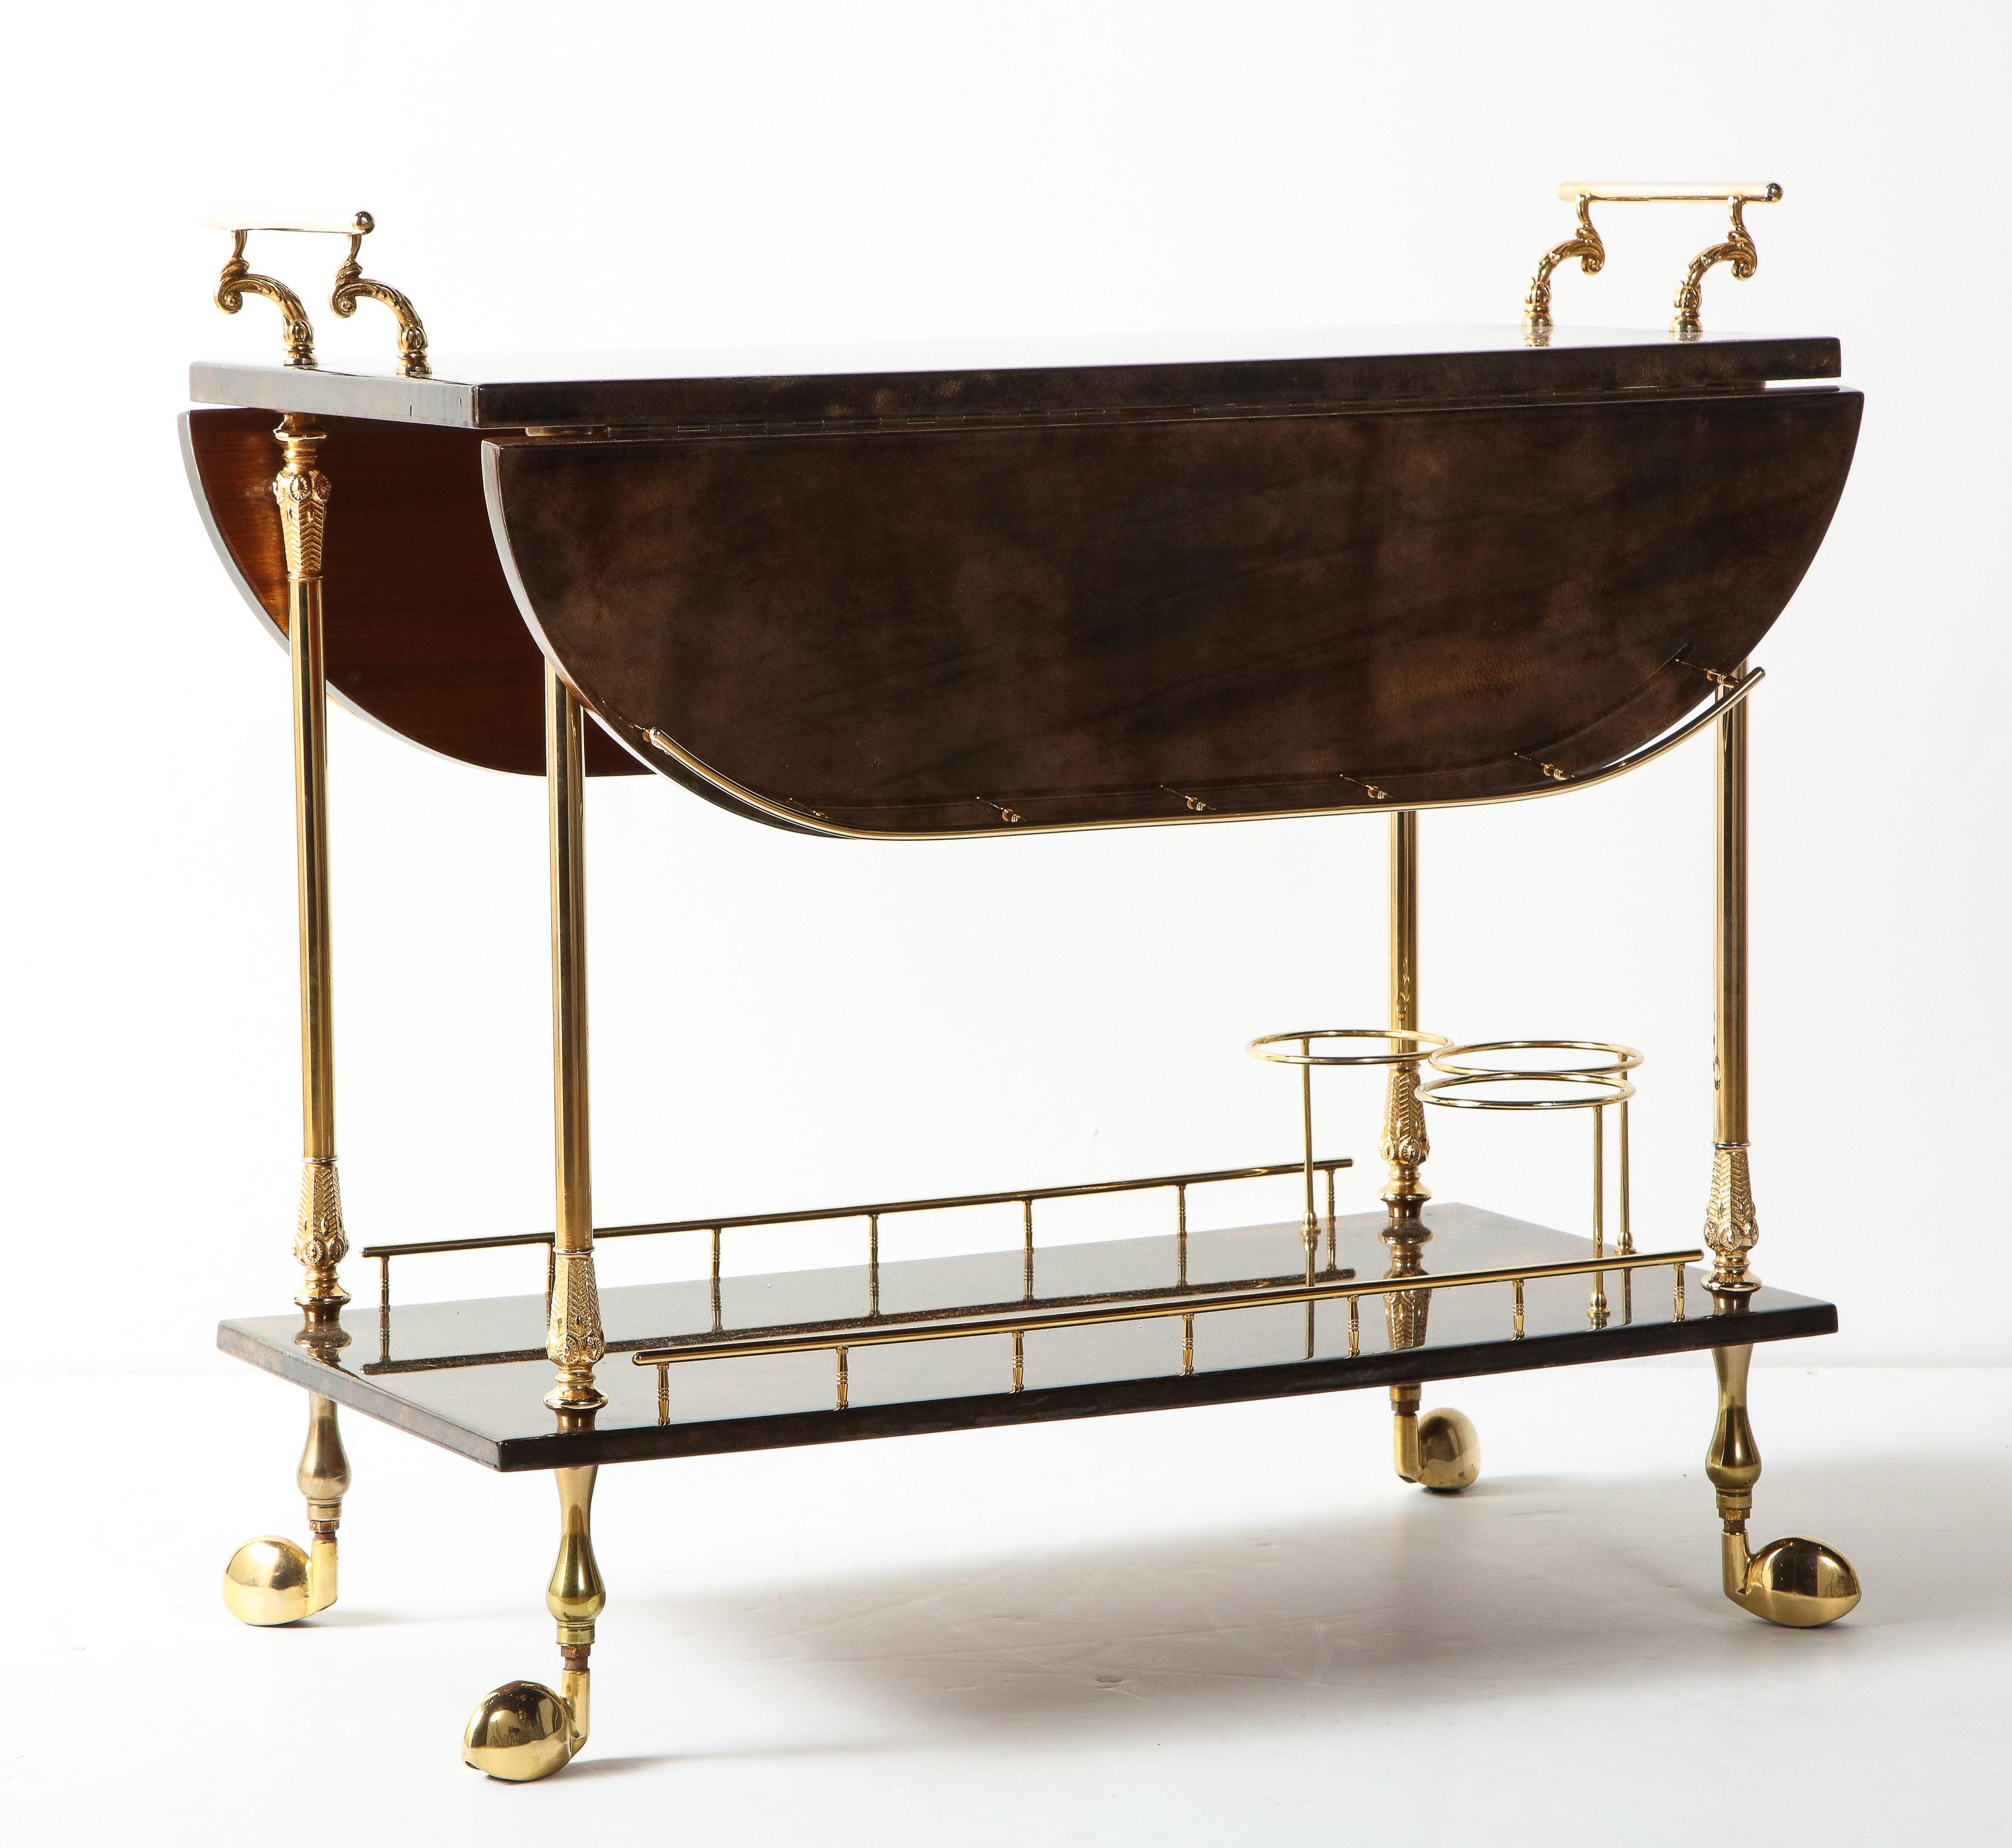 Decorative bar cart by Aldo Tura, Italy, circa 1950. Made of chocolate brown goat skin parchment and polished brass details.
When table is open it measures 30.75 inches. Height including handles is 29 inches. The length of the table without handles